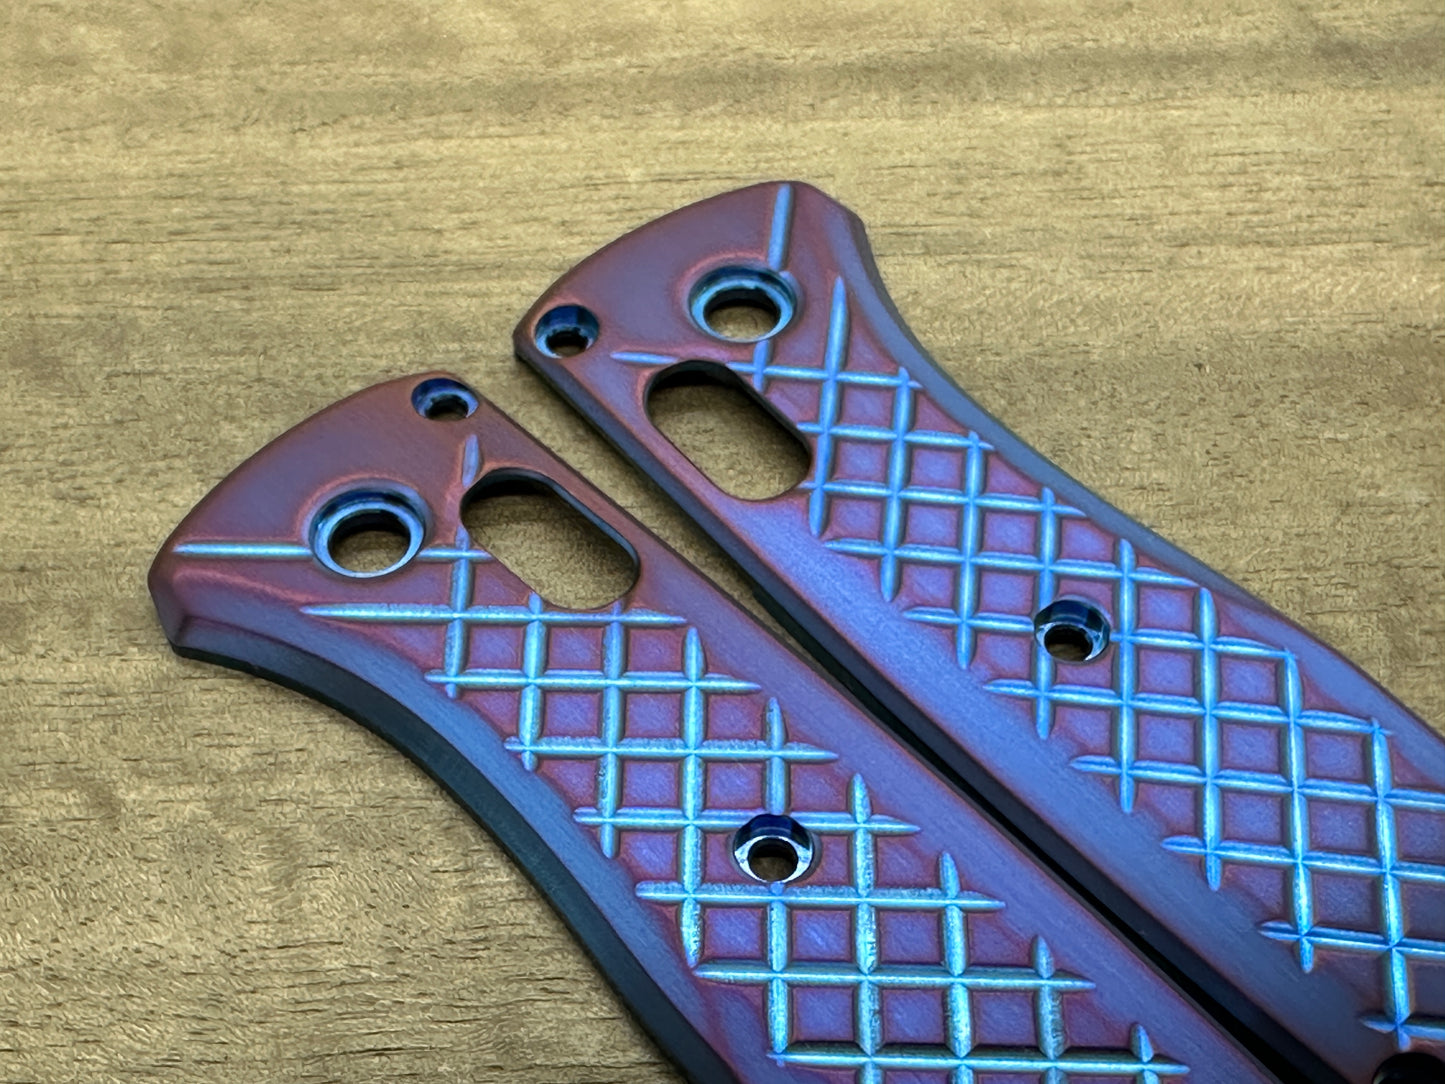 2 Tone (Blue-Purple) FRAG Cnc milled Titanium Scales for Benchmade Bugout 535